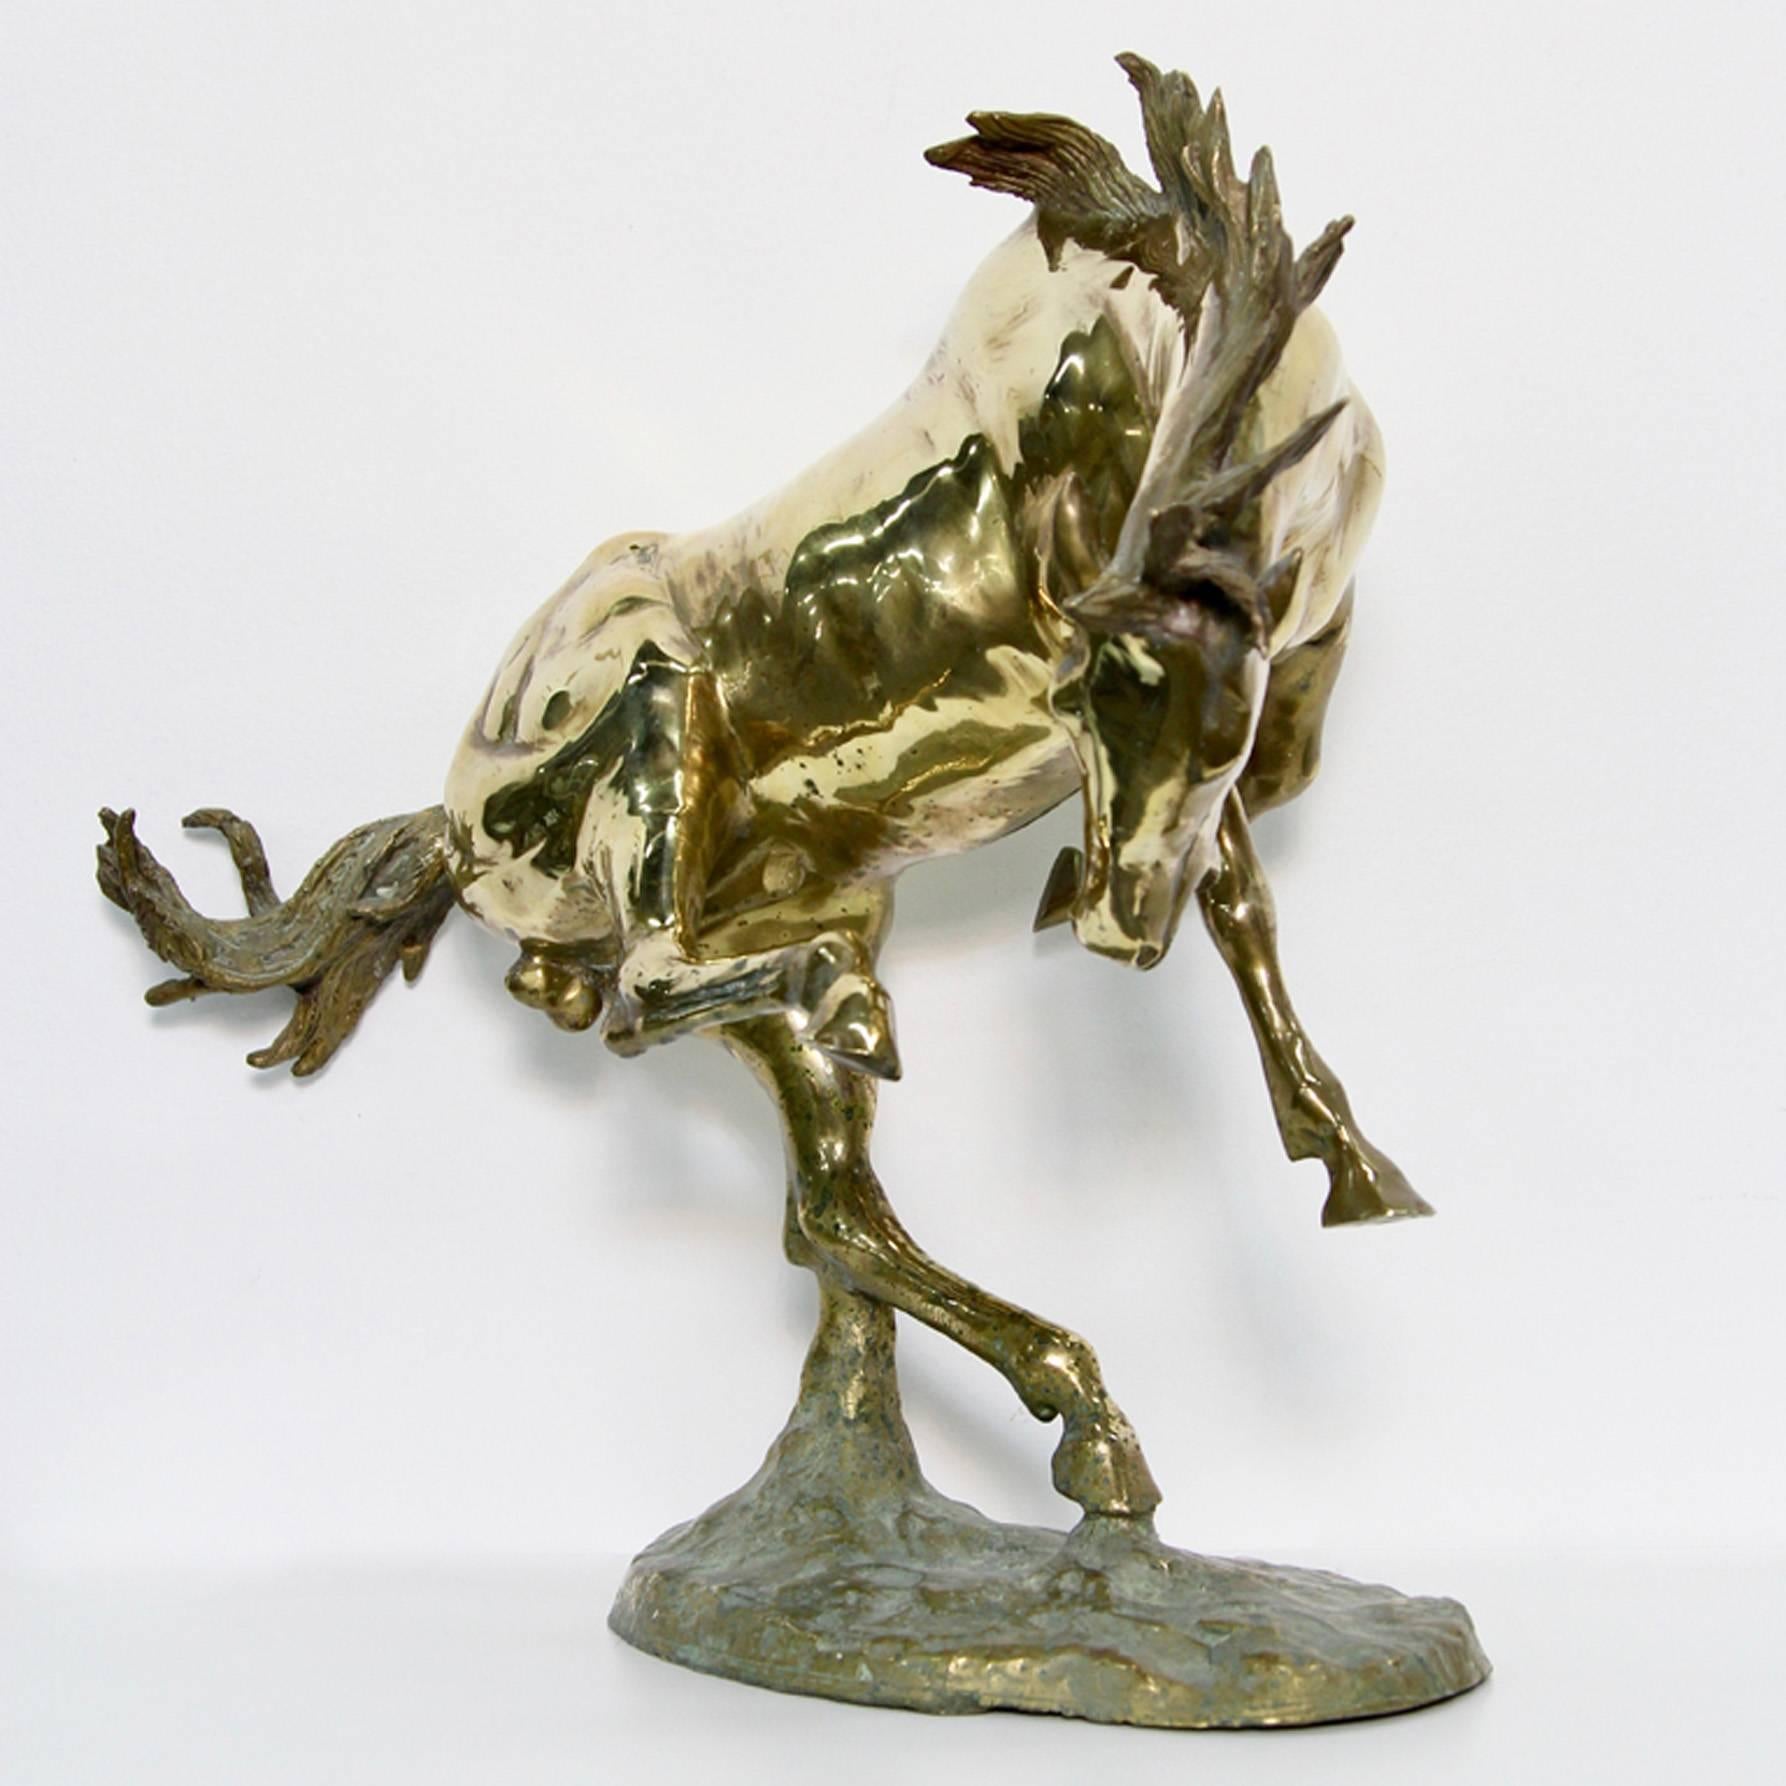 A fantastic bucking bronco done in gold brass. A showpiece perfect for any home.